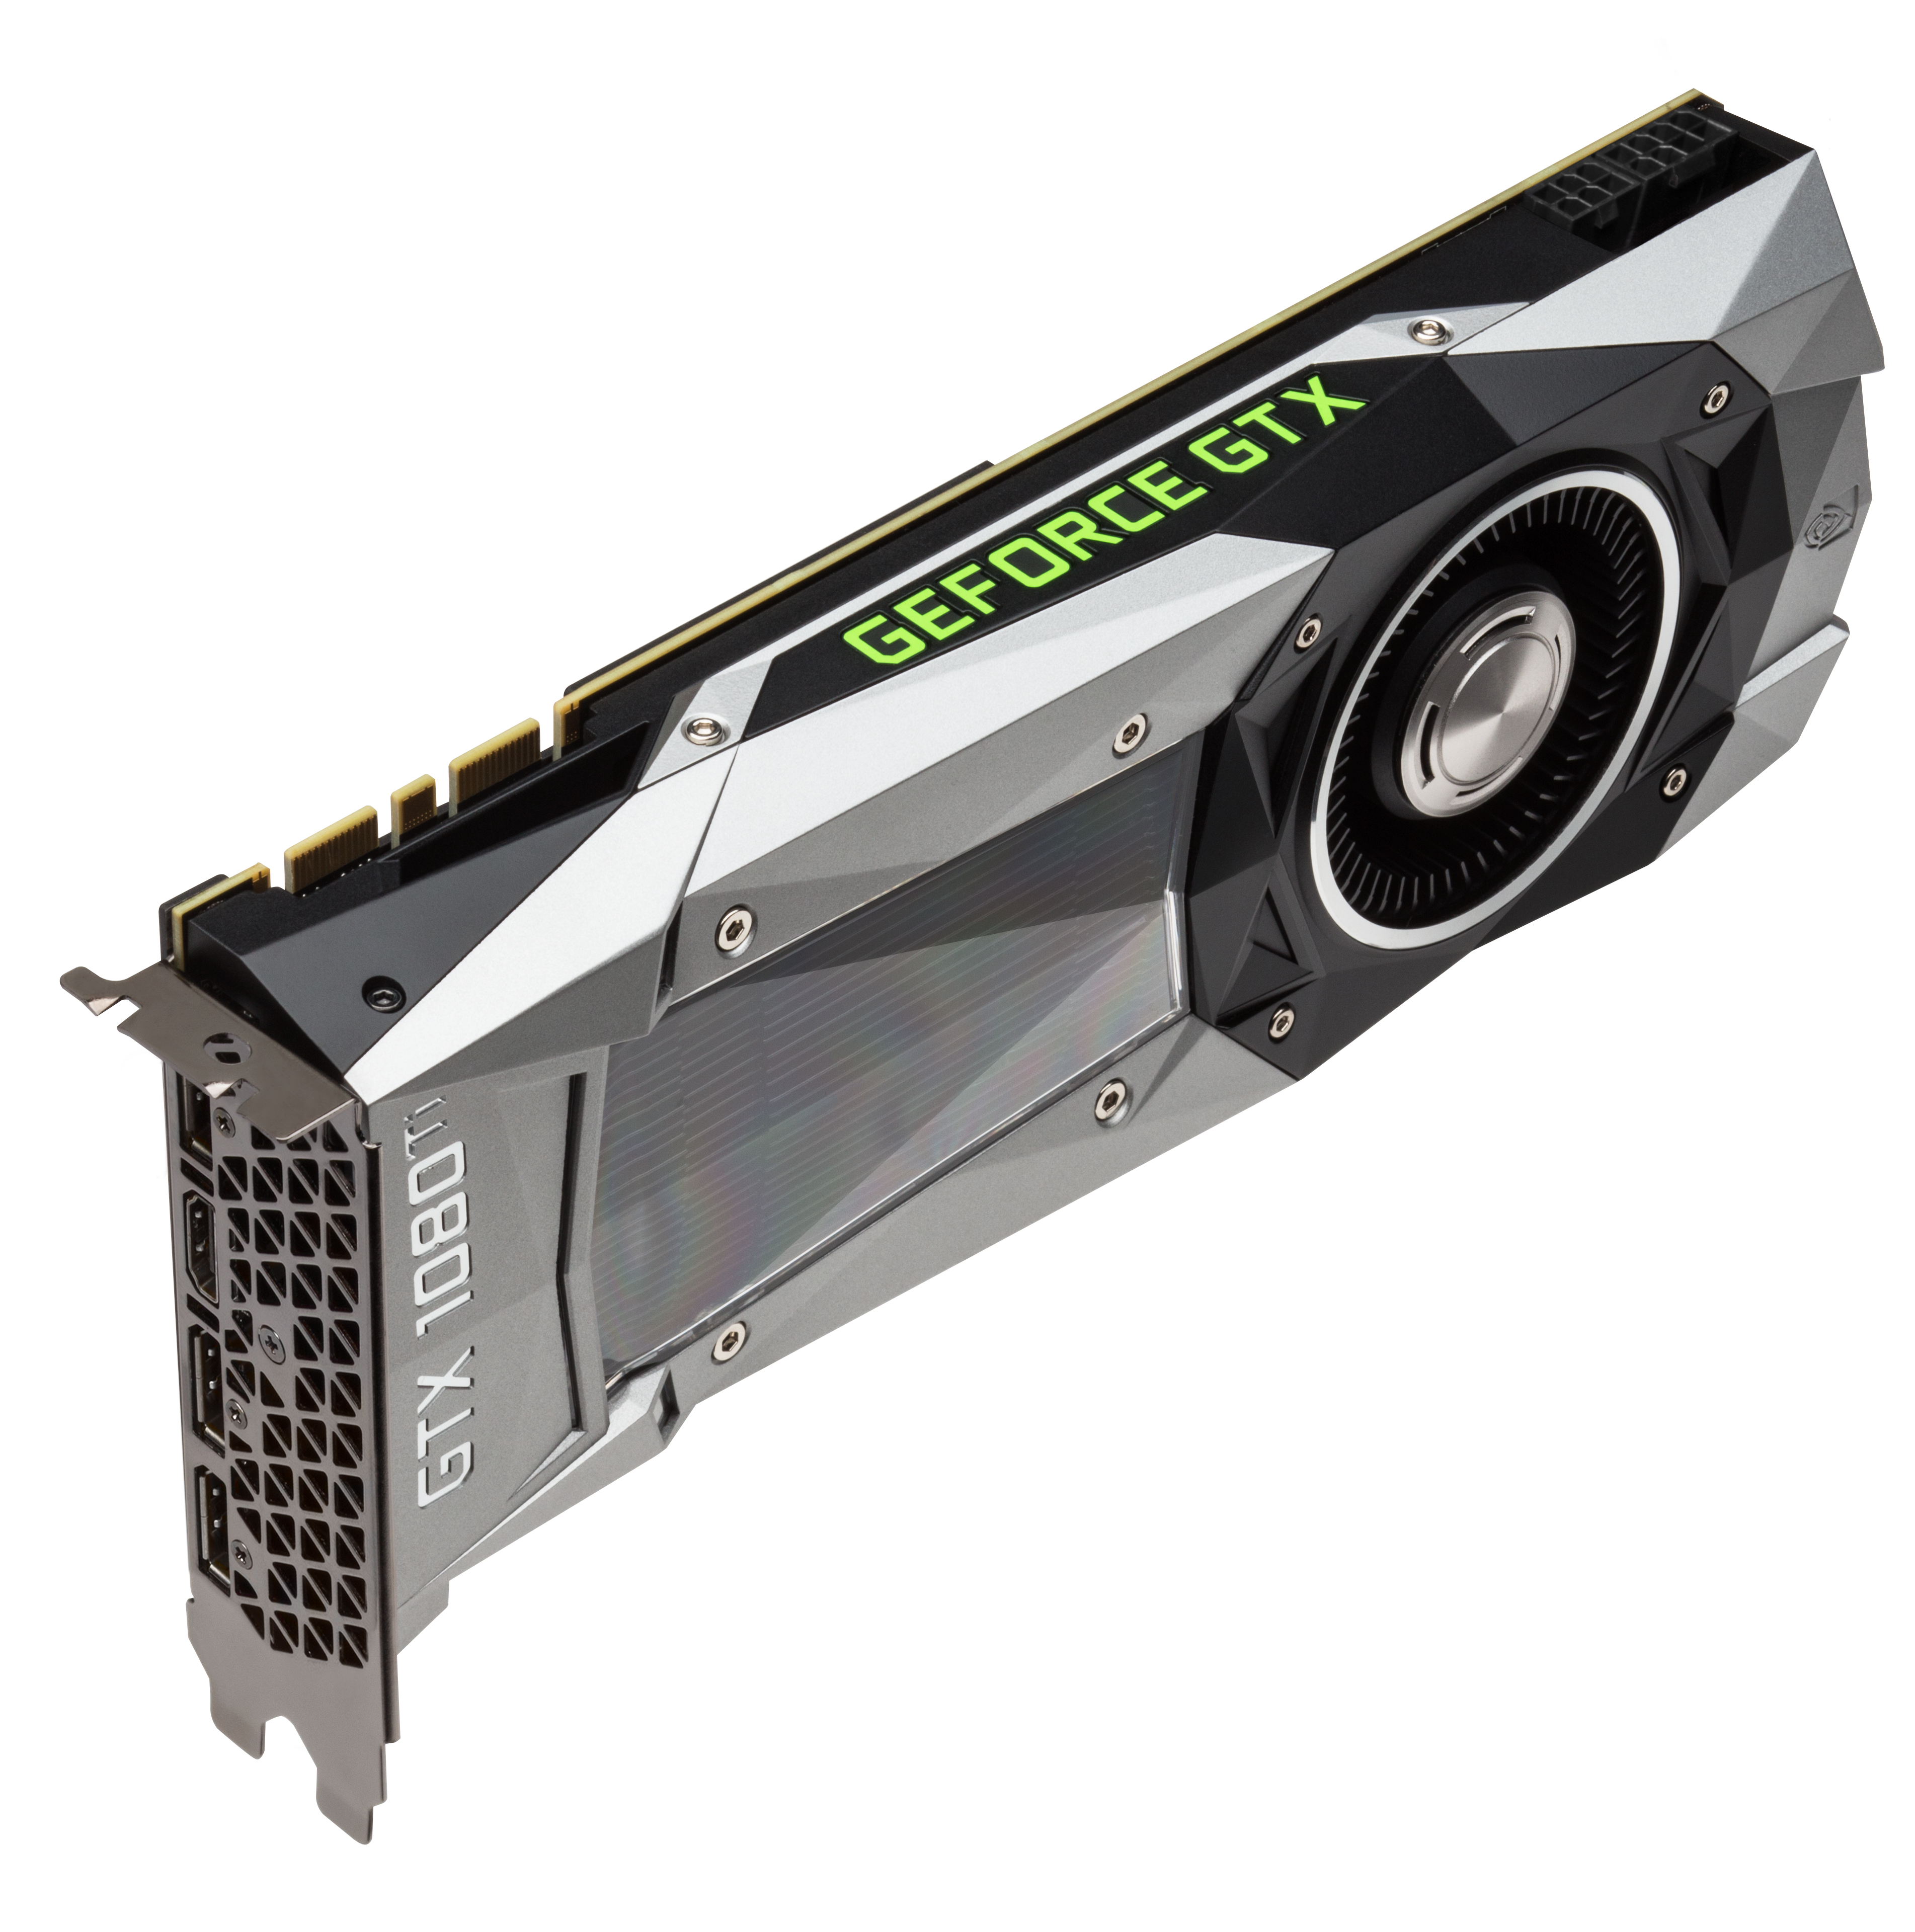 Introducing The GeForce GTX 1080 Ti, The World's Fastest Gaming